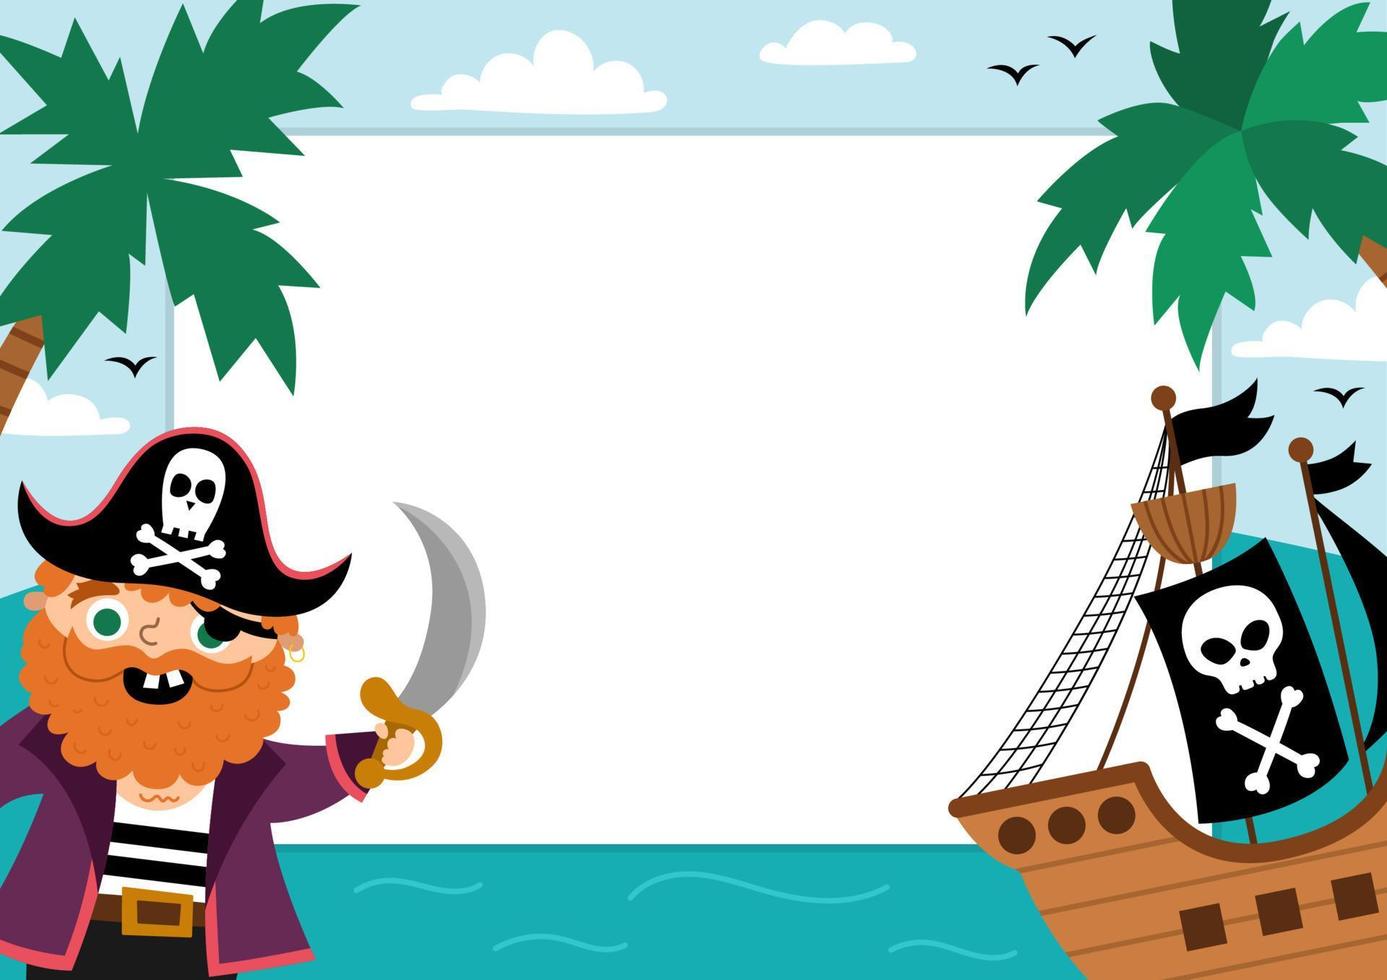 Pirate party greeting card template with cute captain, ship, marine landscape and palm trees. Treasure island horizontal poster or invitation for kids. Bright sea holiday illustration vector